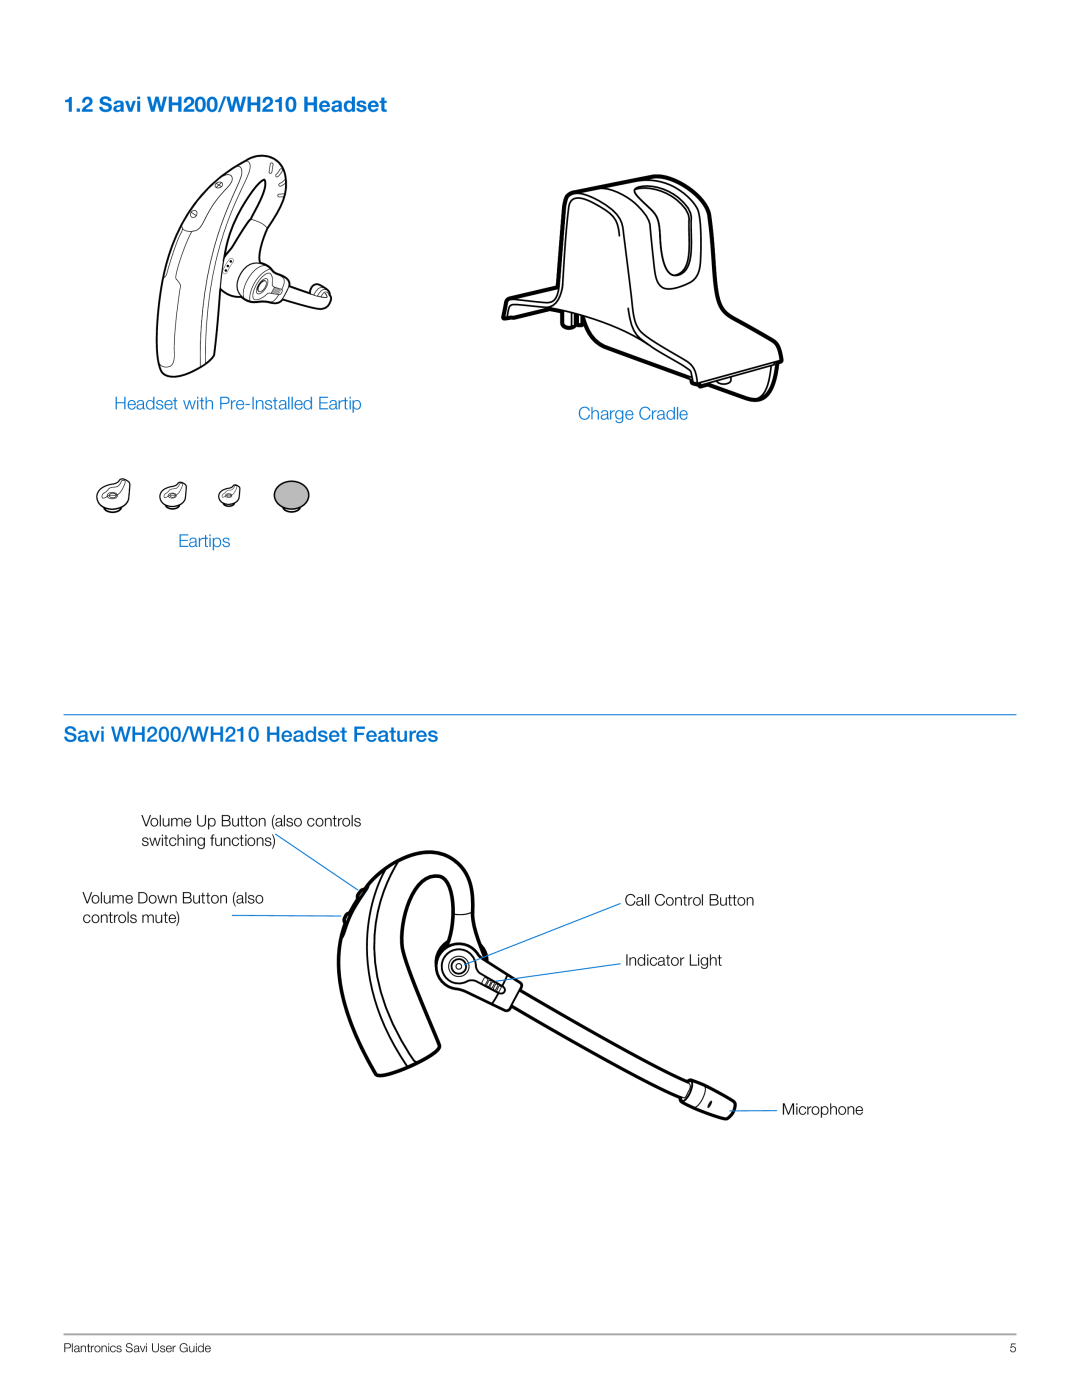 Plantronics HL10, WO201 Savi WH200/WH210 Headset Features, Headset with Pre-InstalledEartip, Charge Cradle, Eartips 